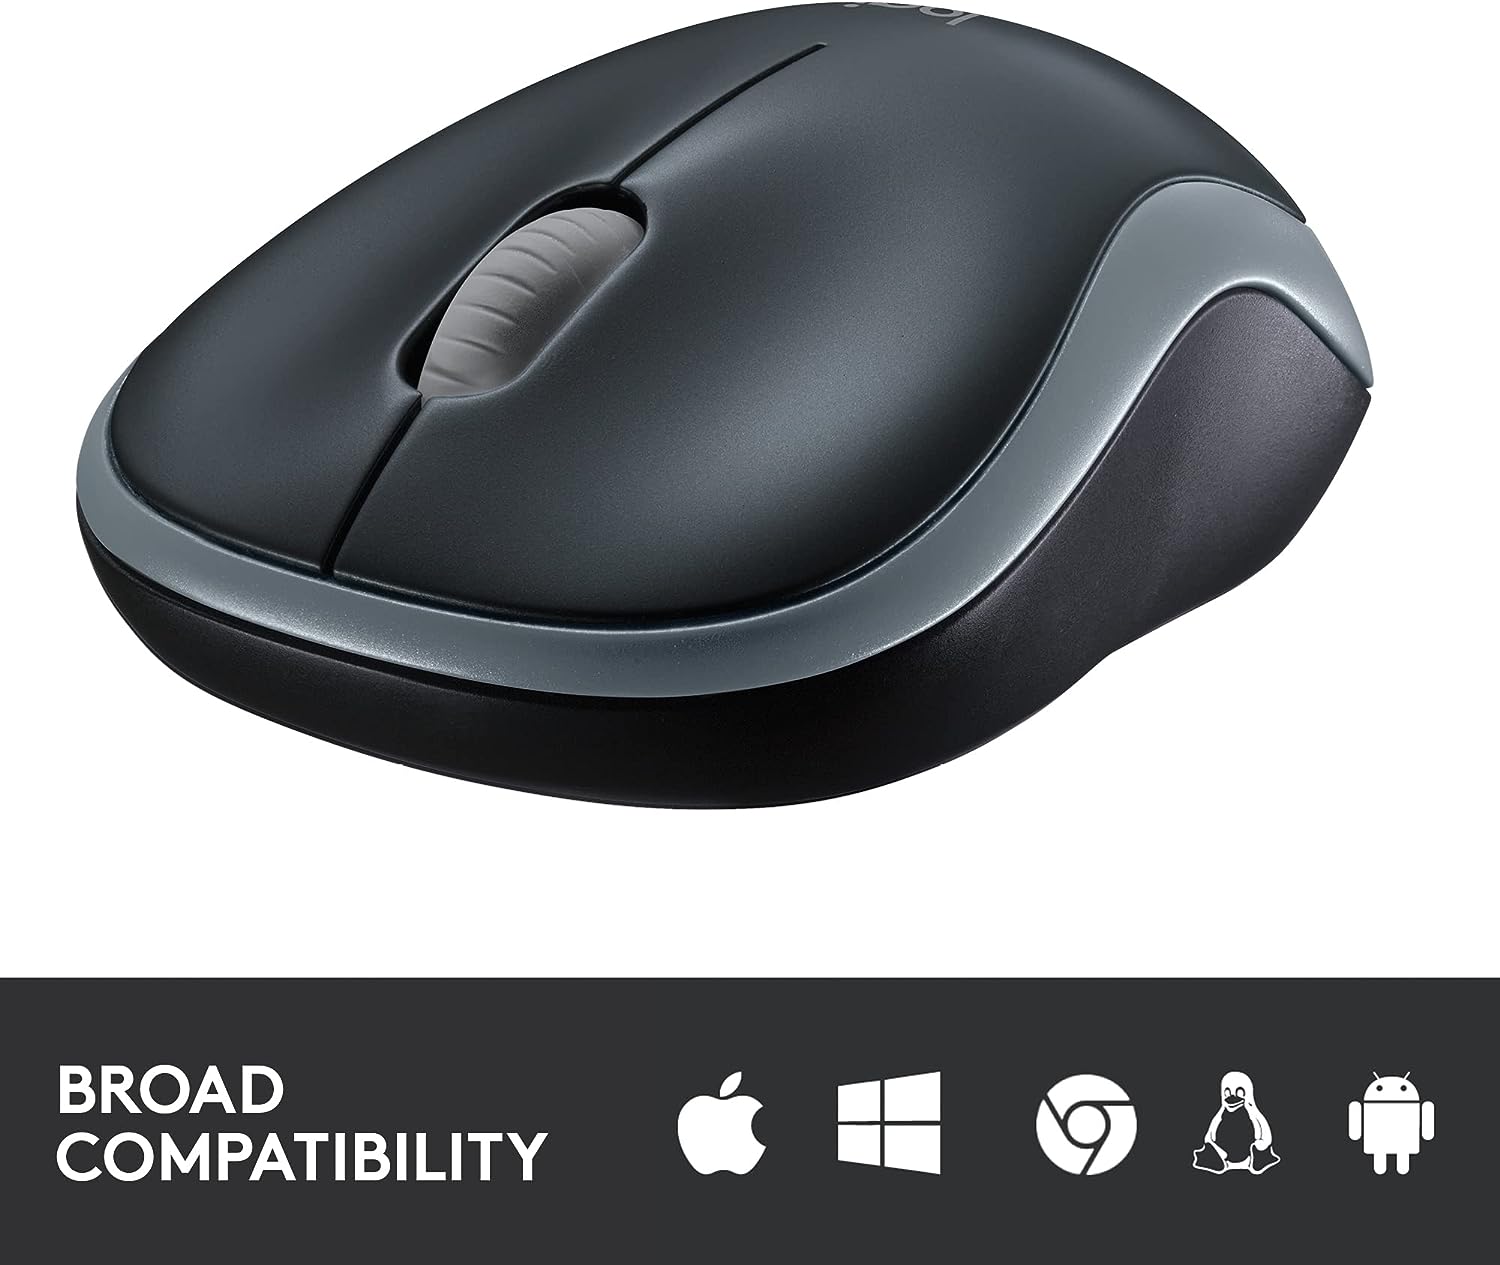 Logitech M185 Wireless Mouse, 2.4GHz with USB Mini Receiver